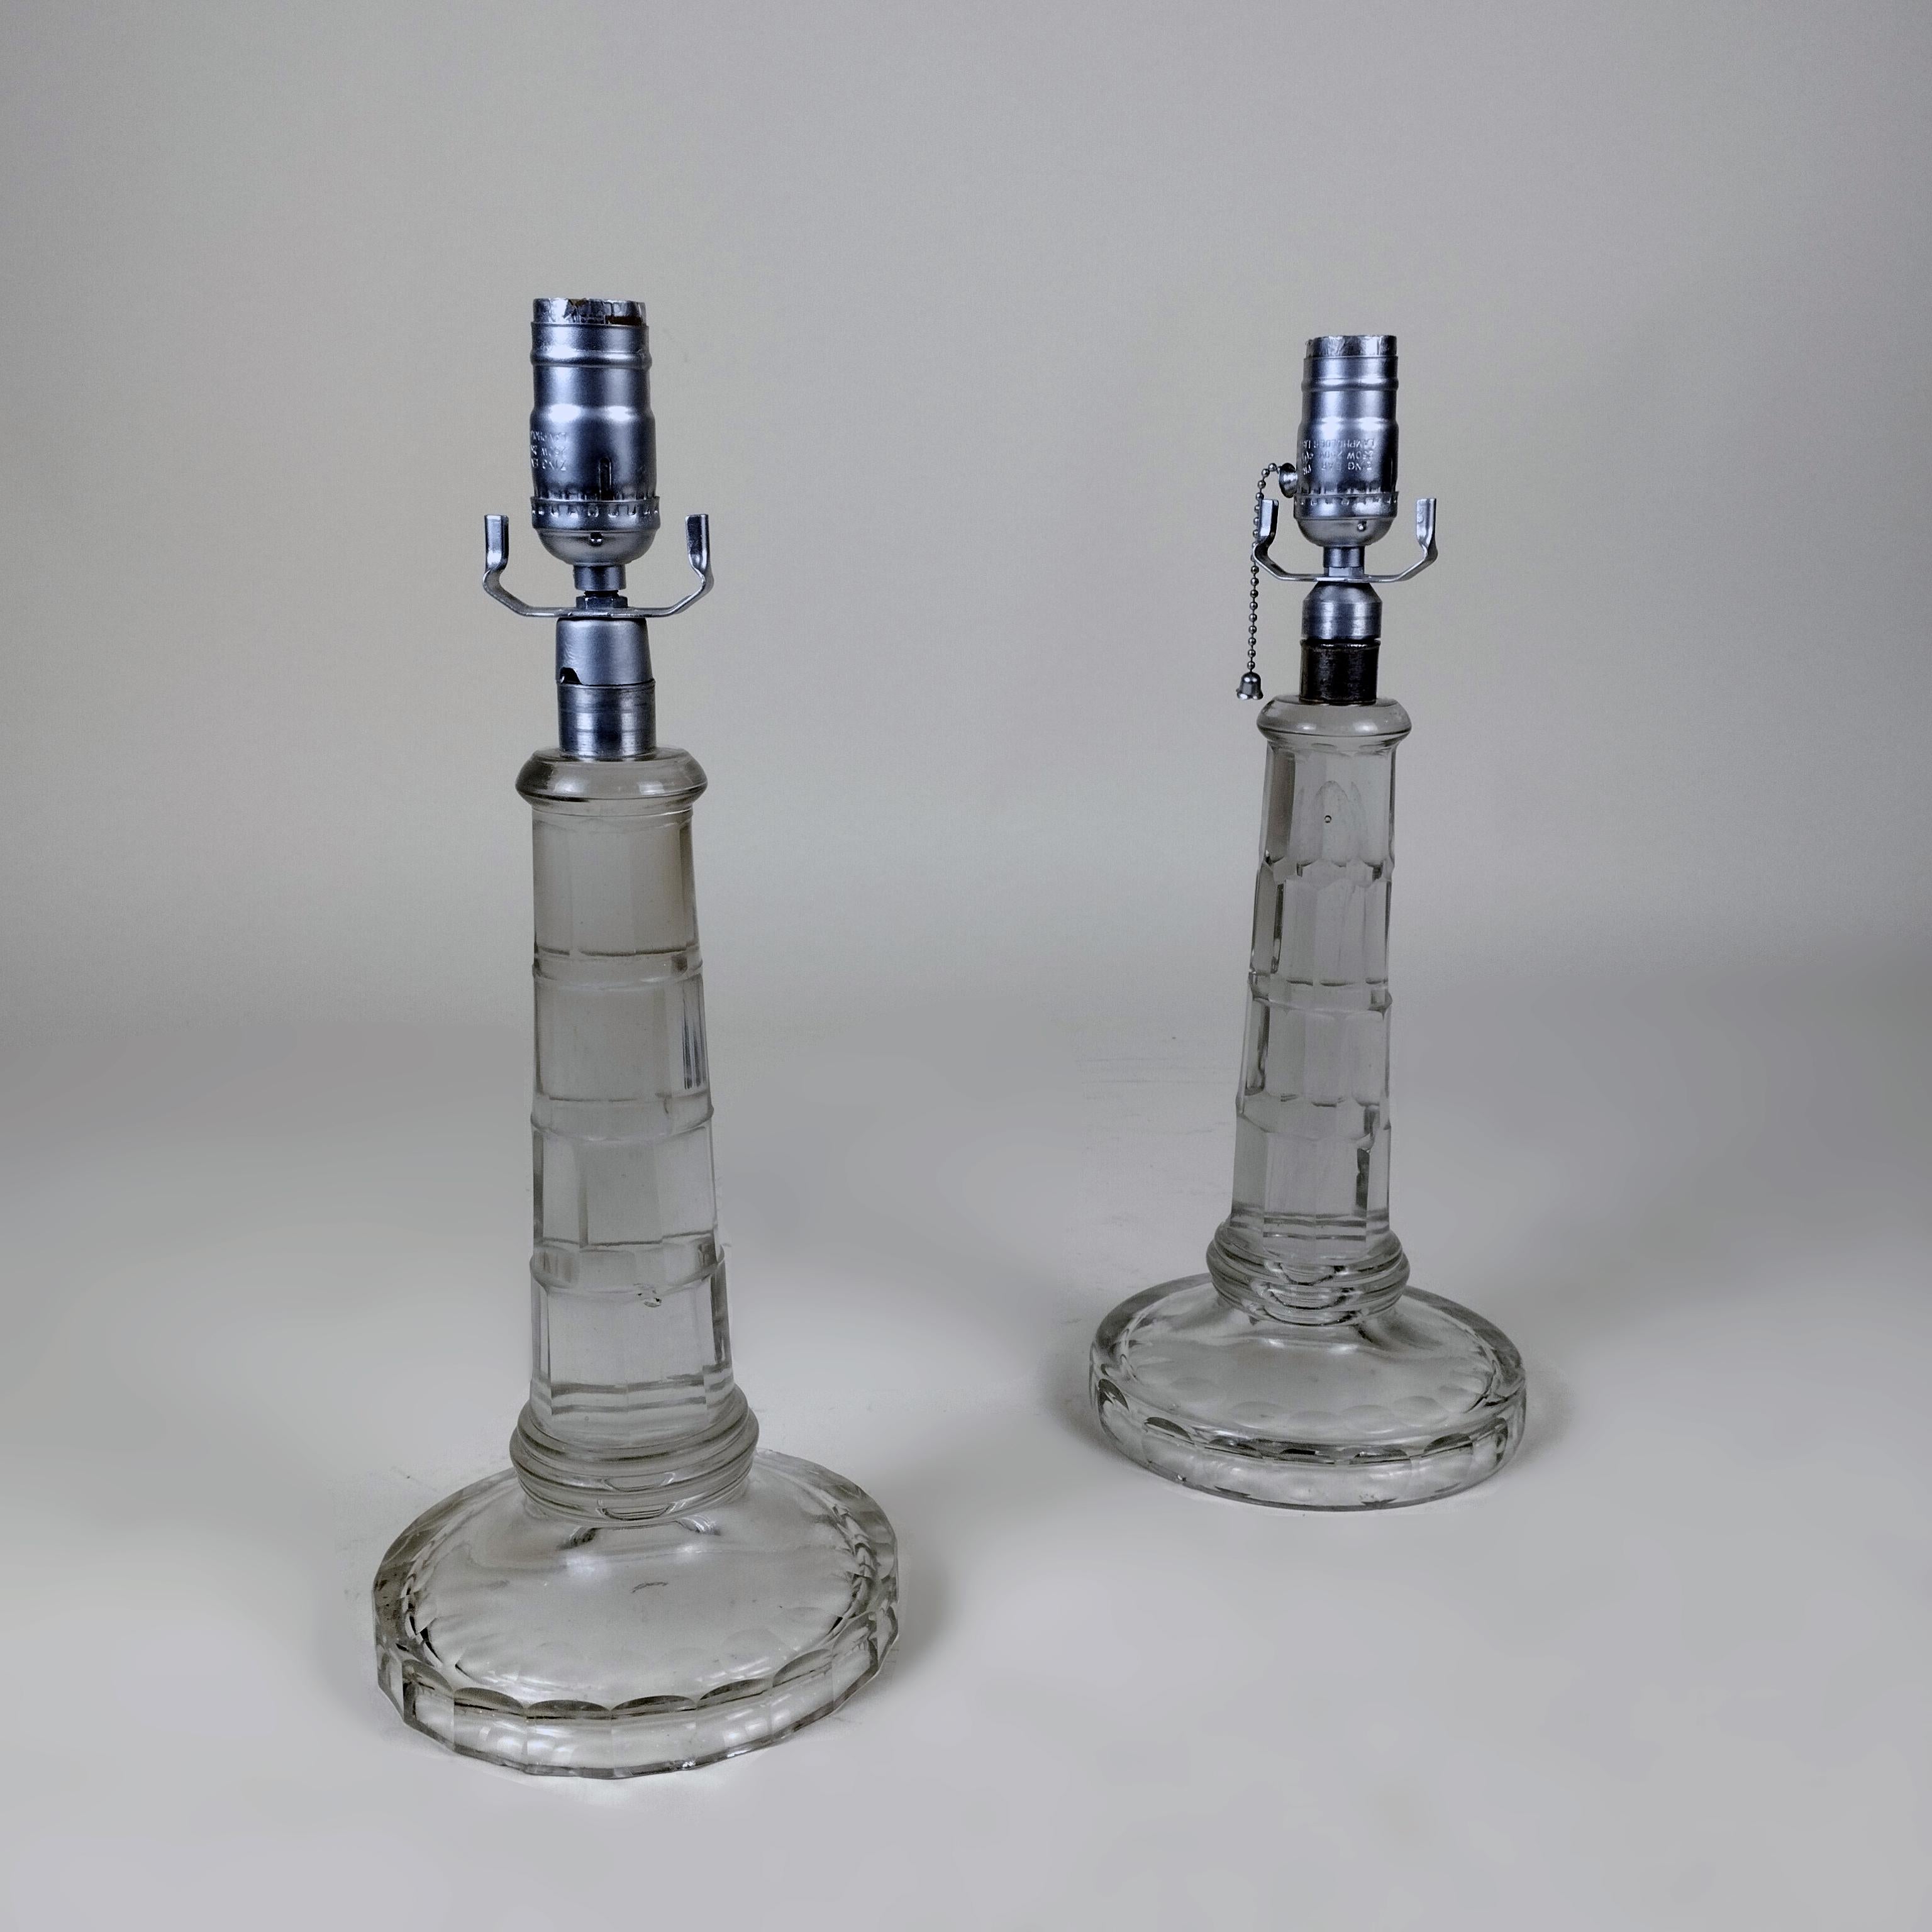 A 1960's pair of cut glass table lamps. The glass body shows facet cut design. Sockets and shade holders are made of silvery metal. No shades included.